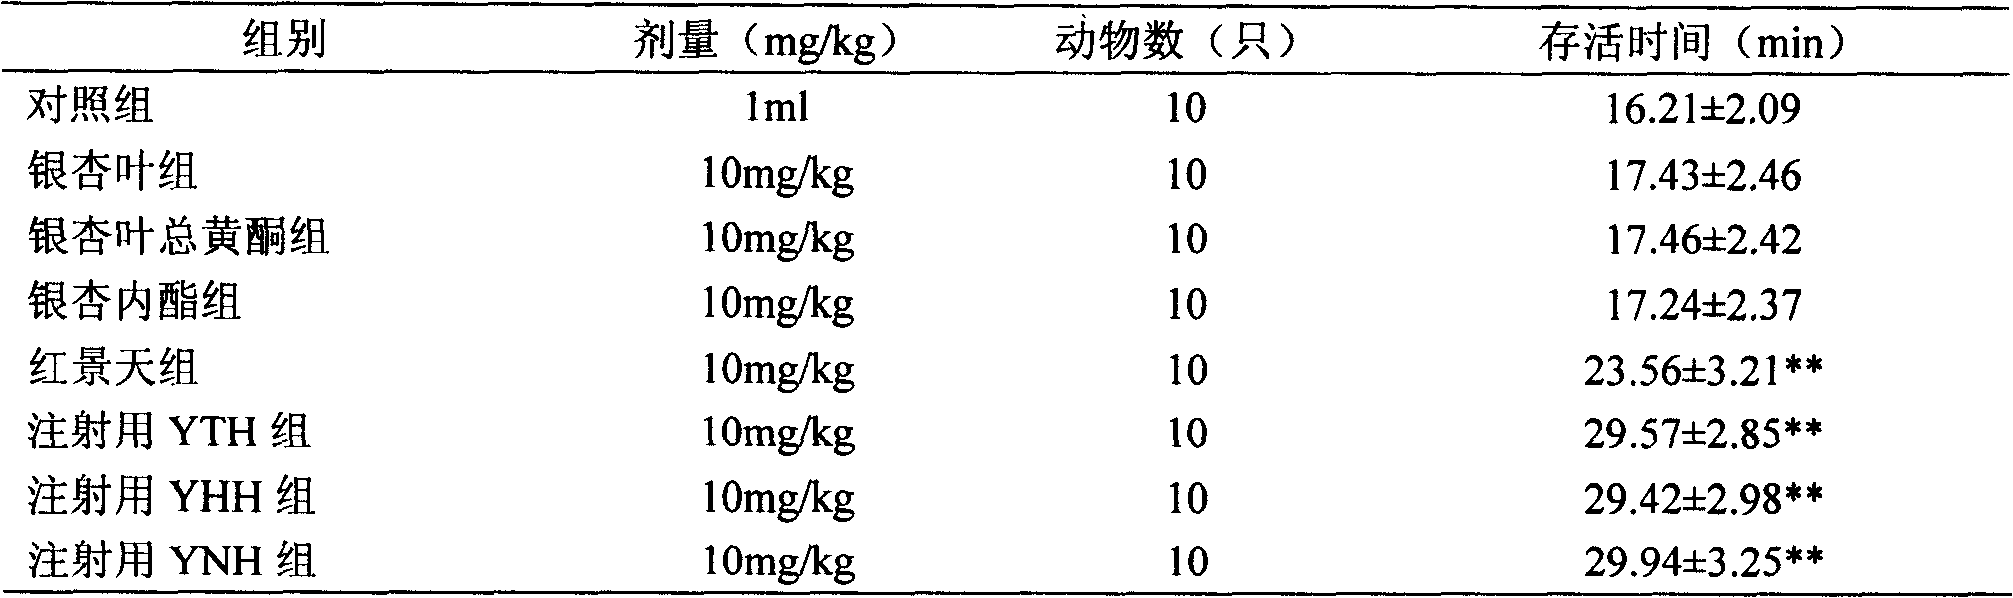 Medicine composition of gingko leaf and rhodiola root